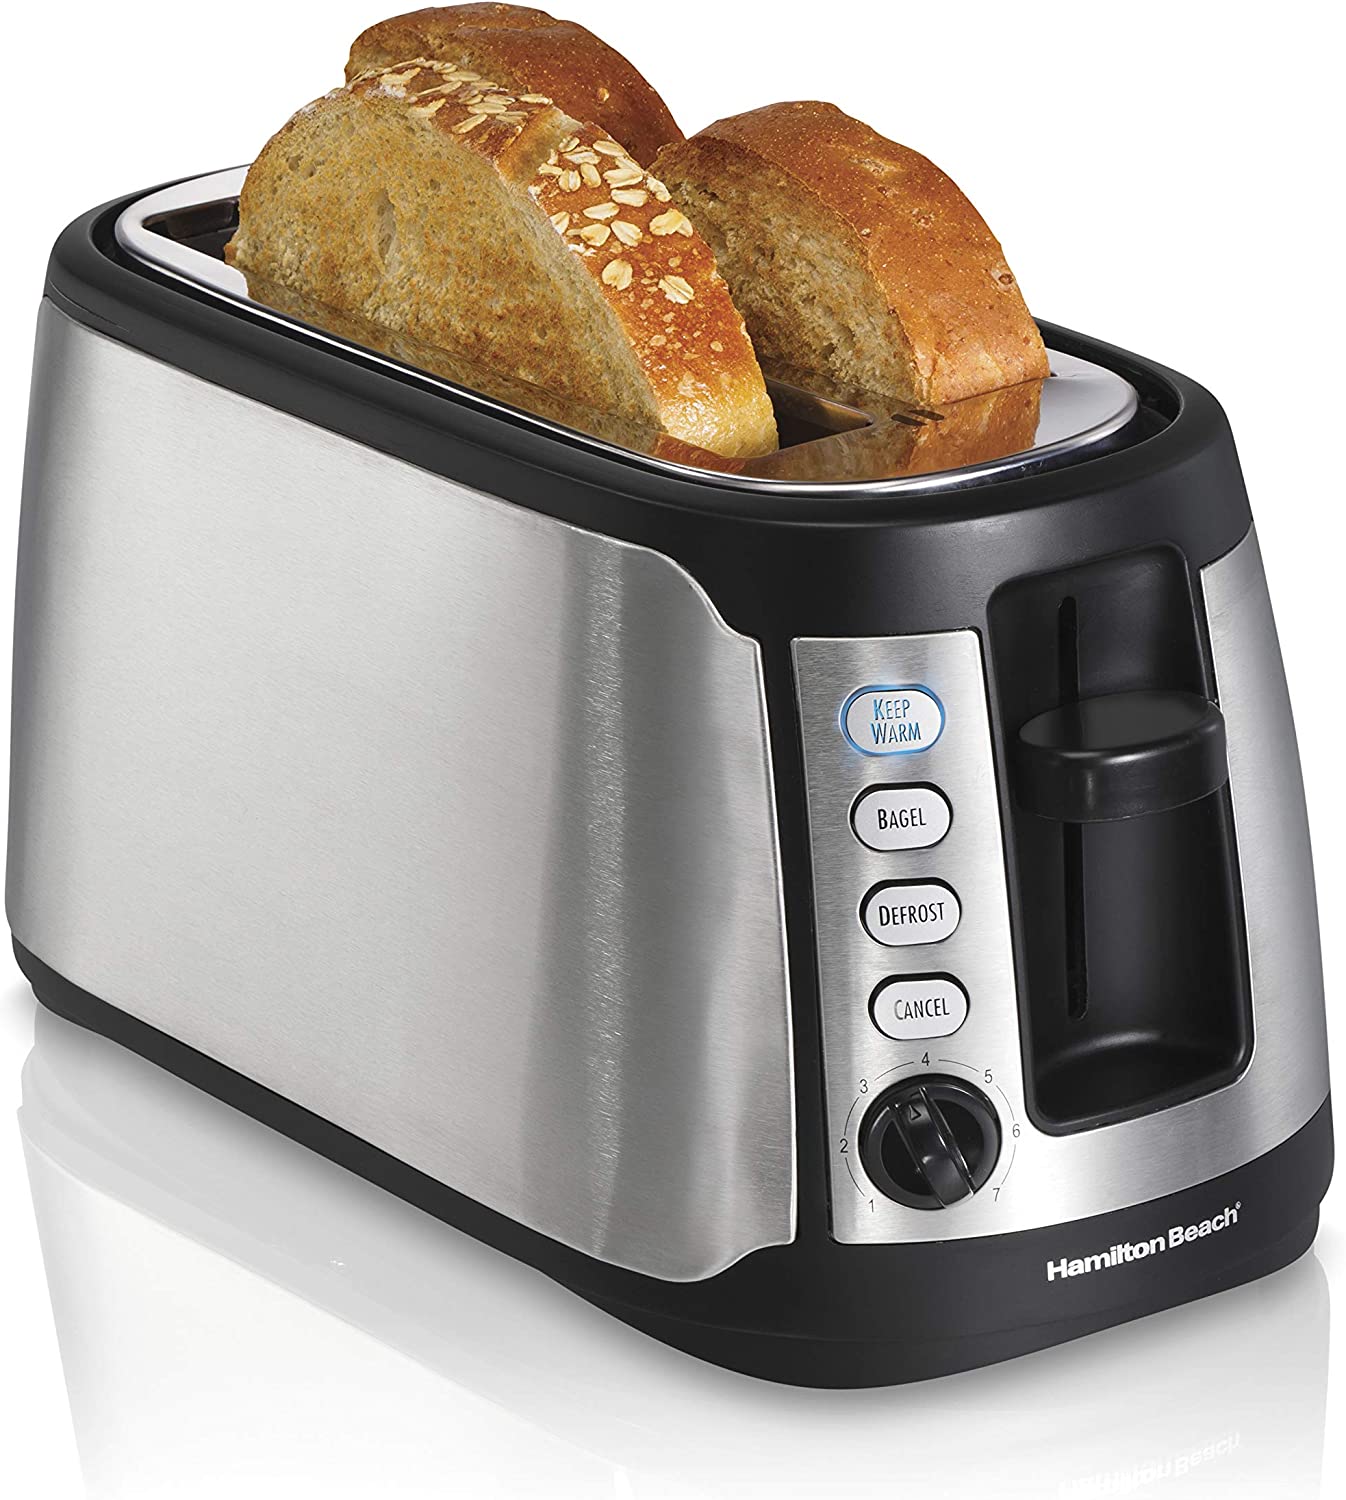 Hamilton Beach 24810C 4-Slice Long Slot Toaster with Keep Warm Stainless Steel - Refurbished